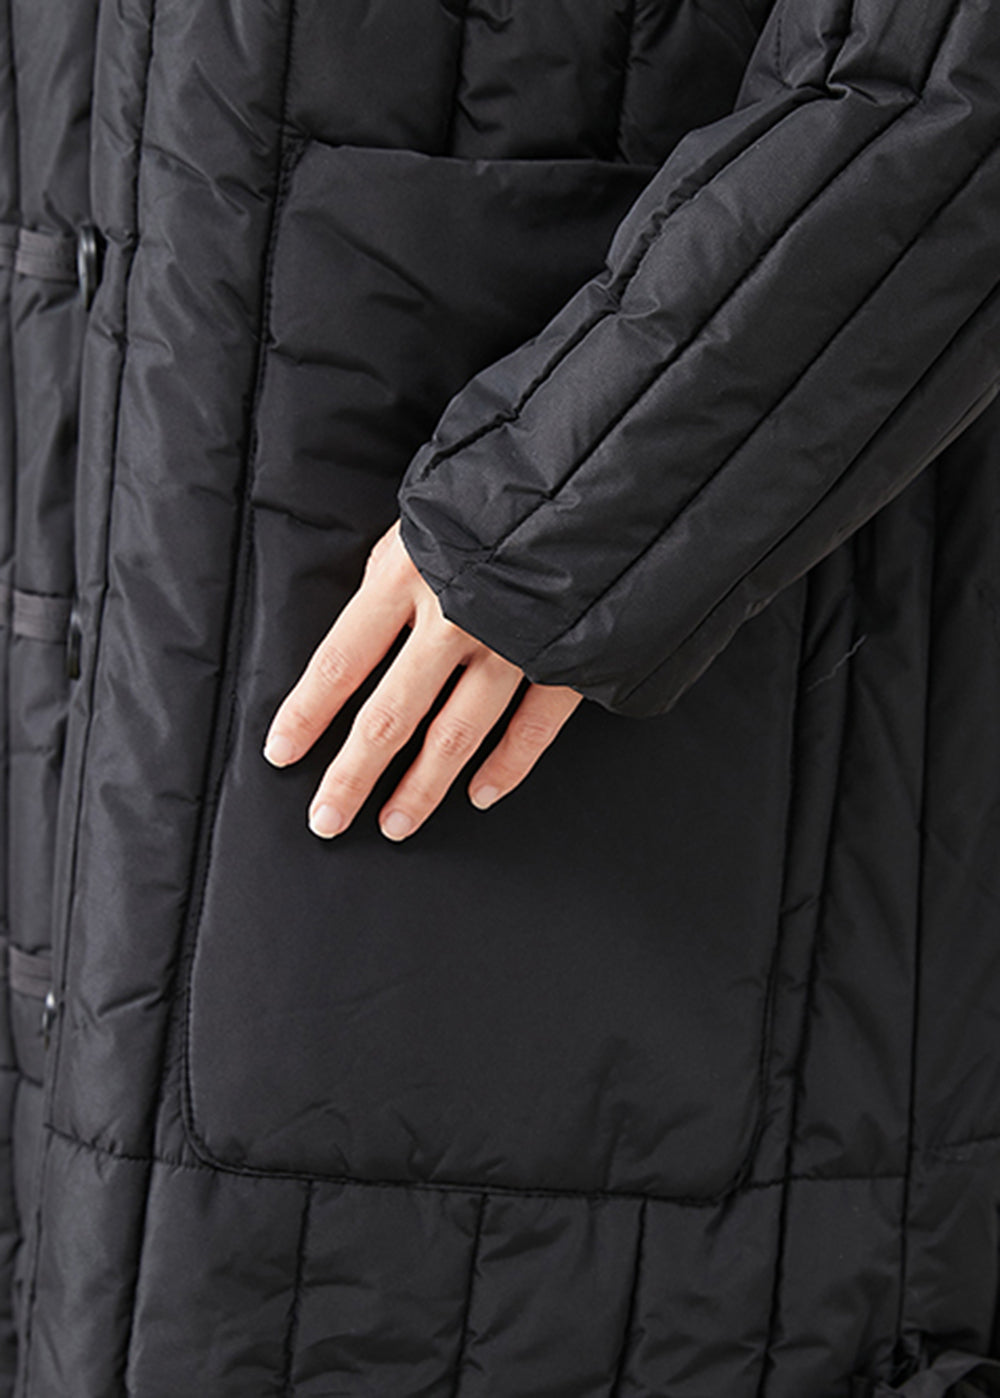 Casual Black Oversized Striped Fine Cotton Filled Puffers Jackets Winter